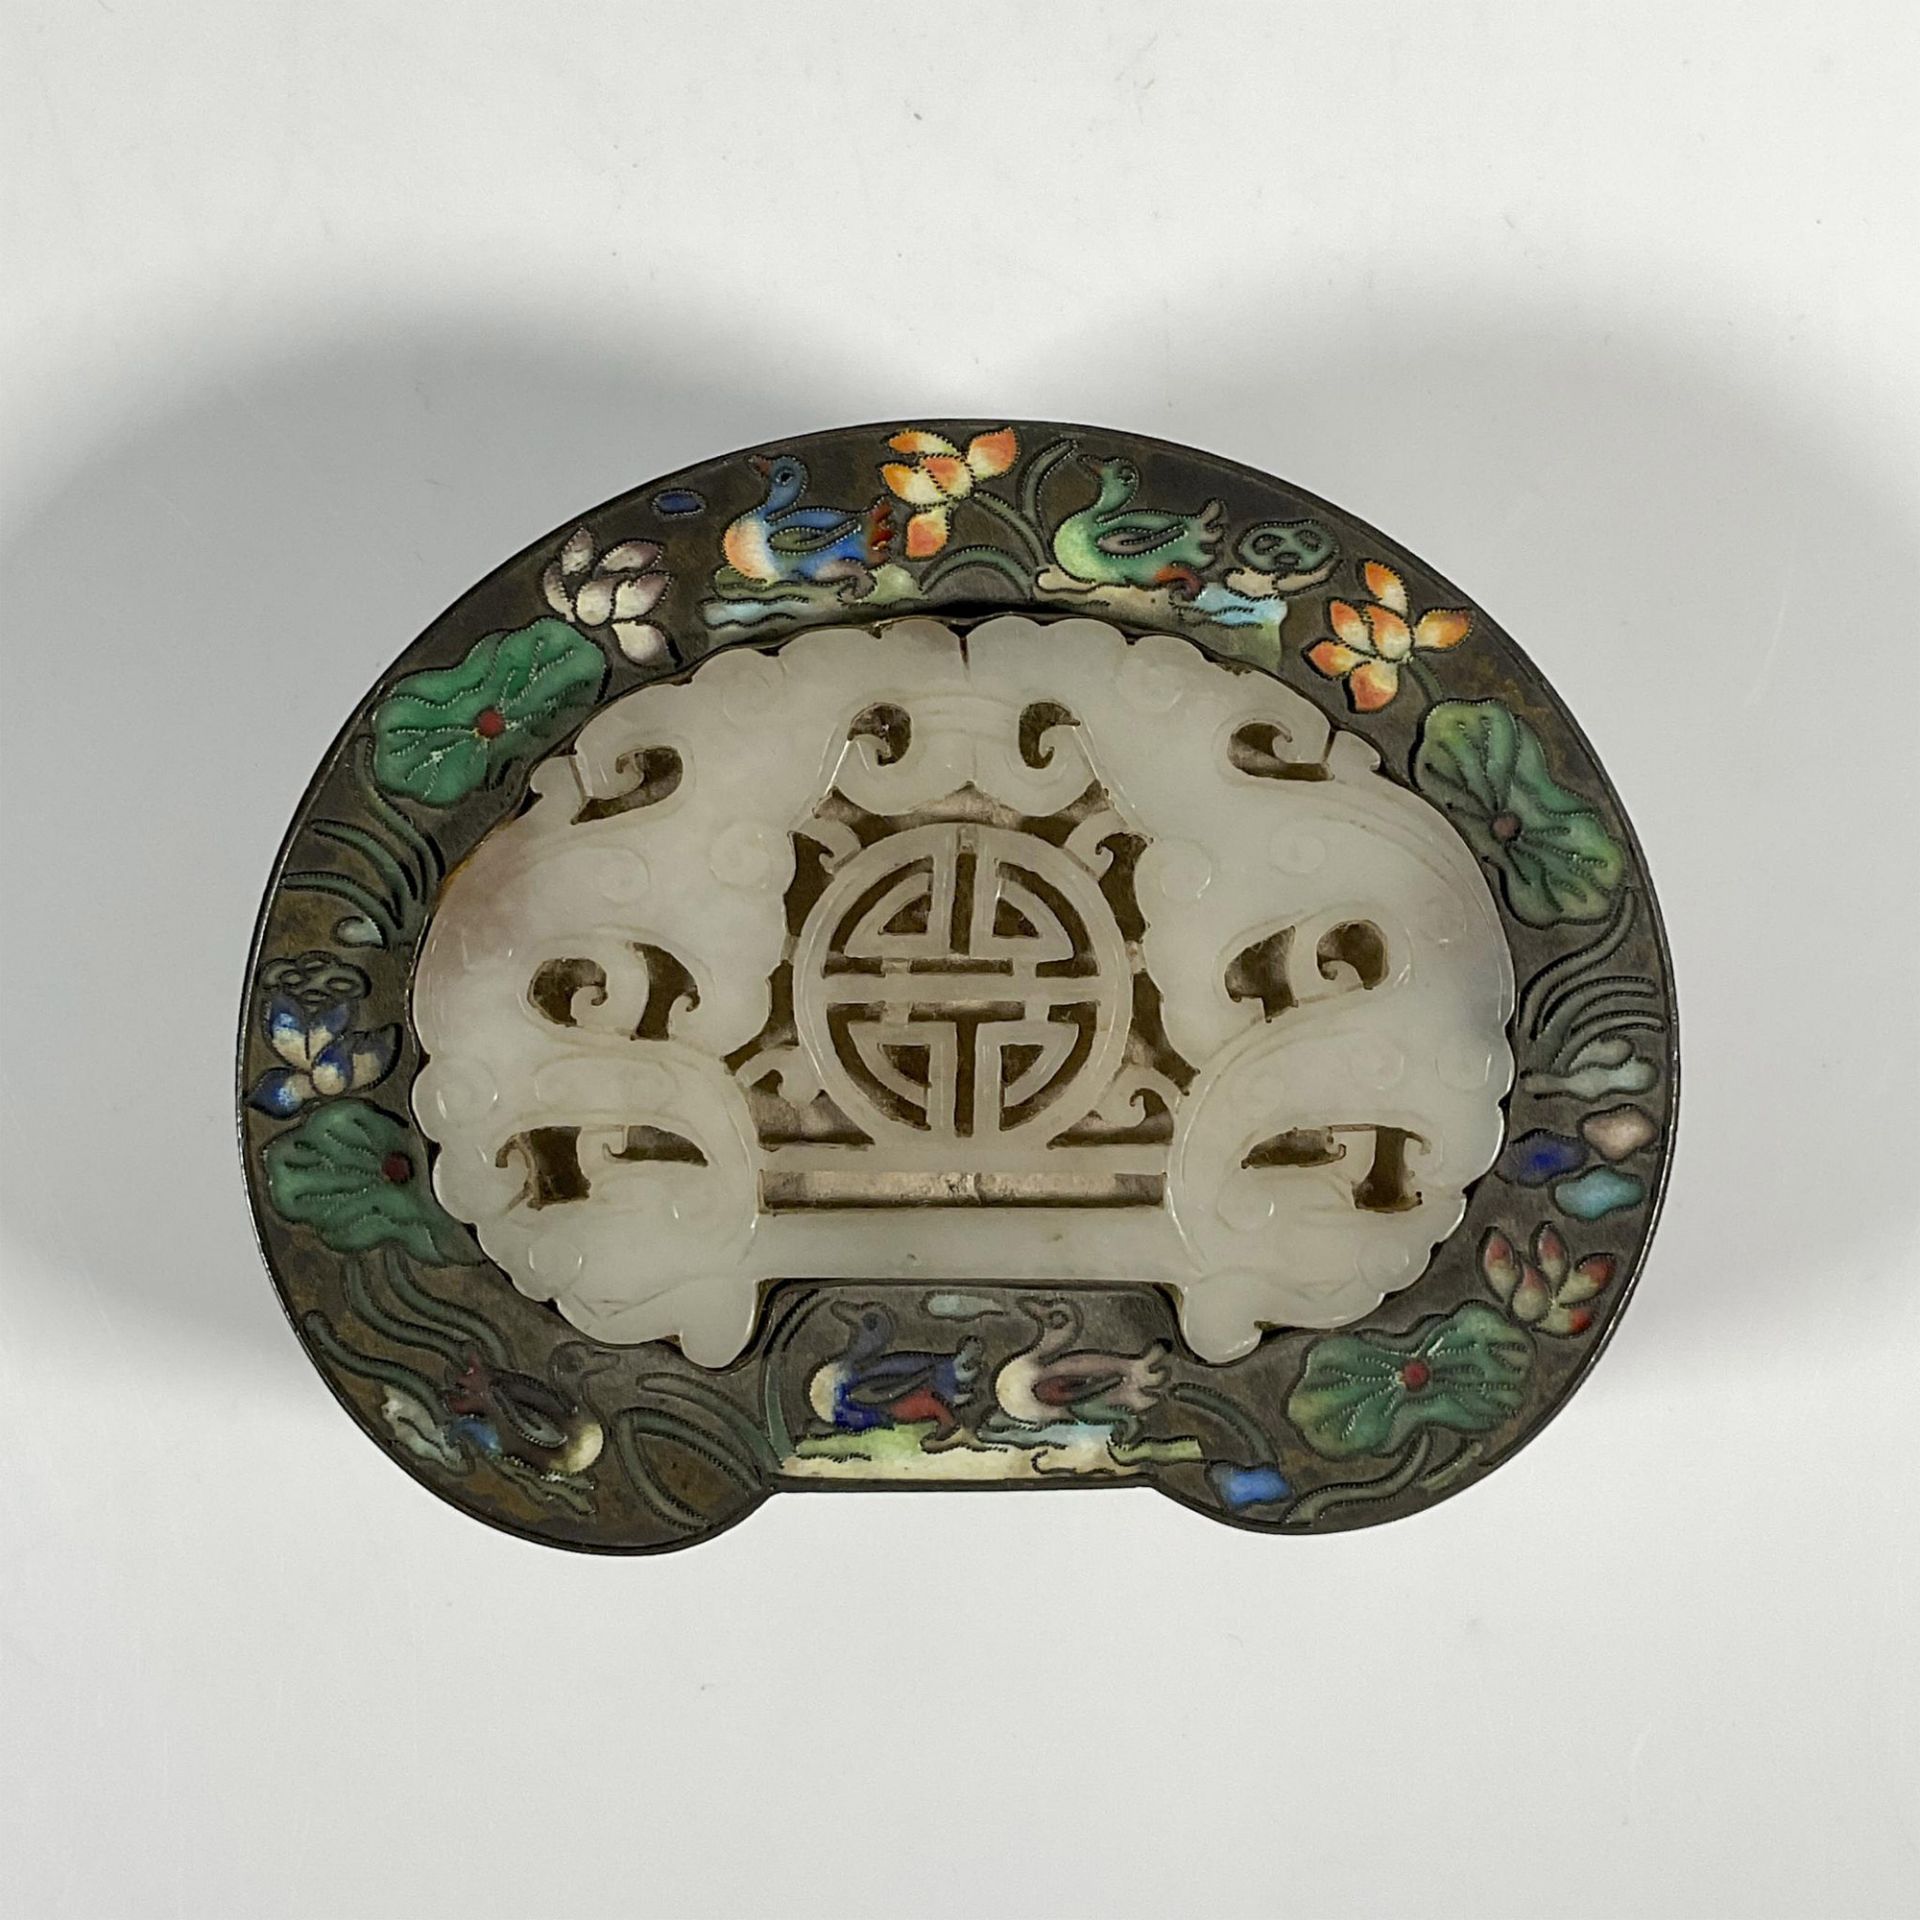 Antique Chinese Cloisonne Jade Box - Image 2 of 4